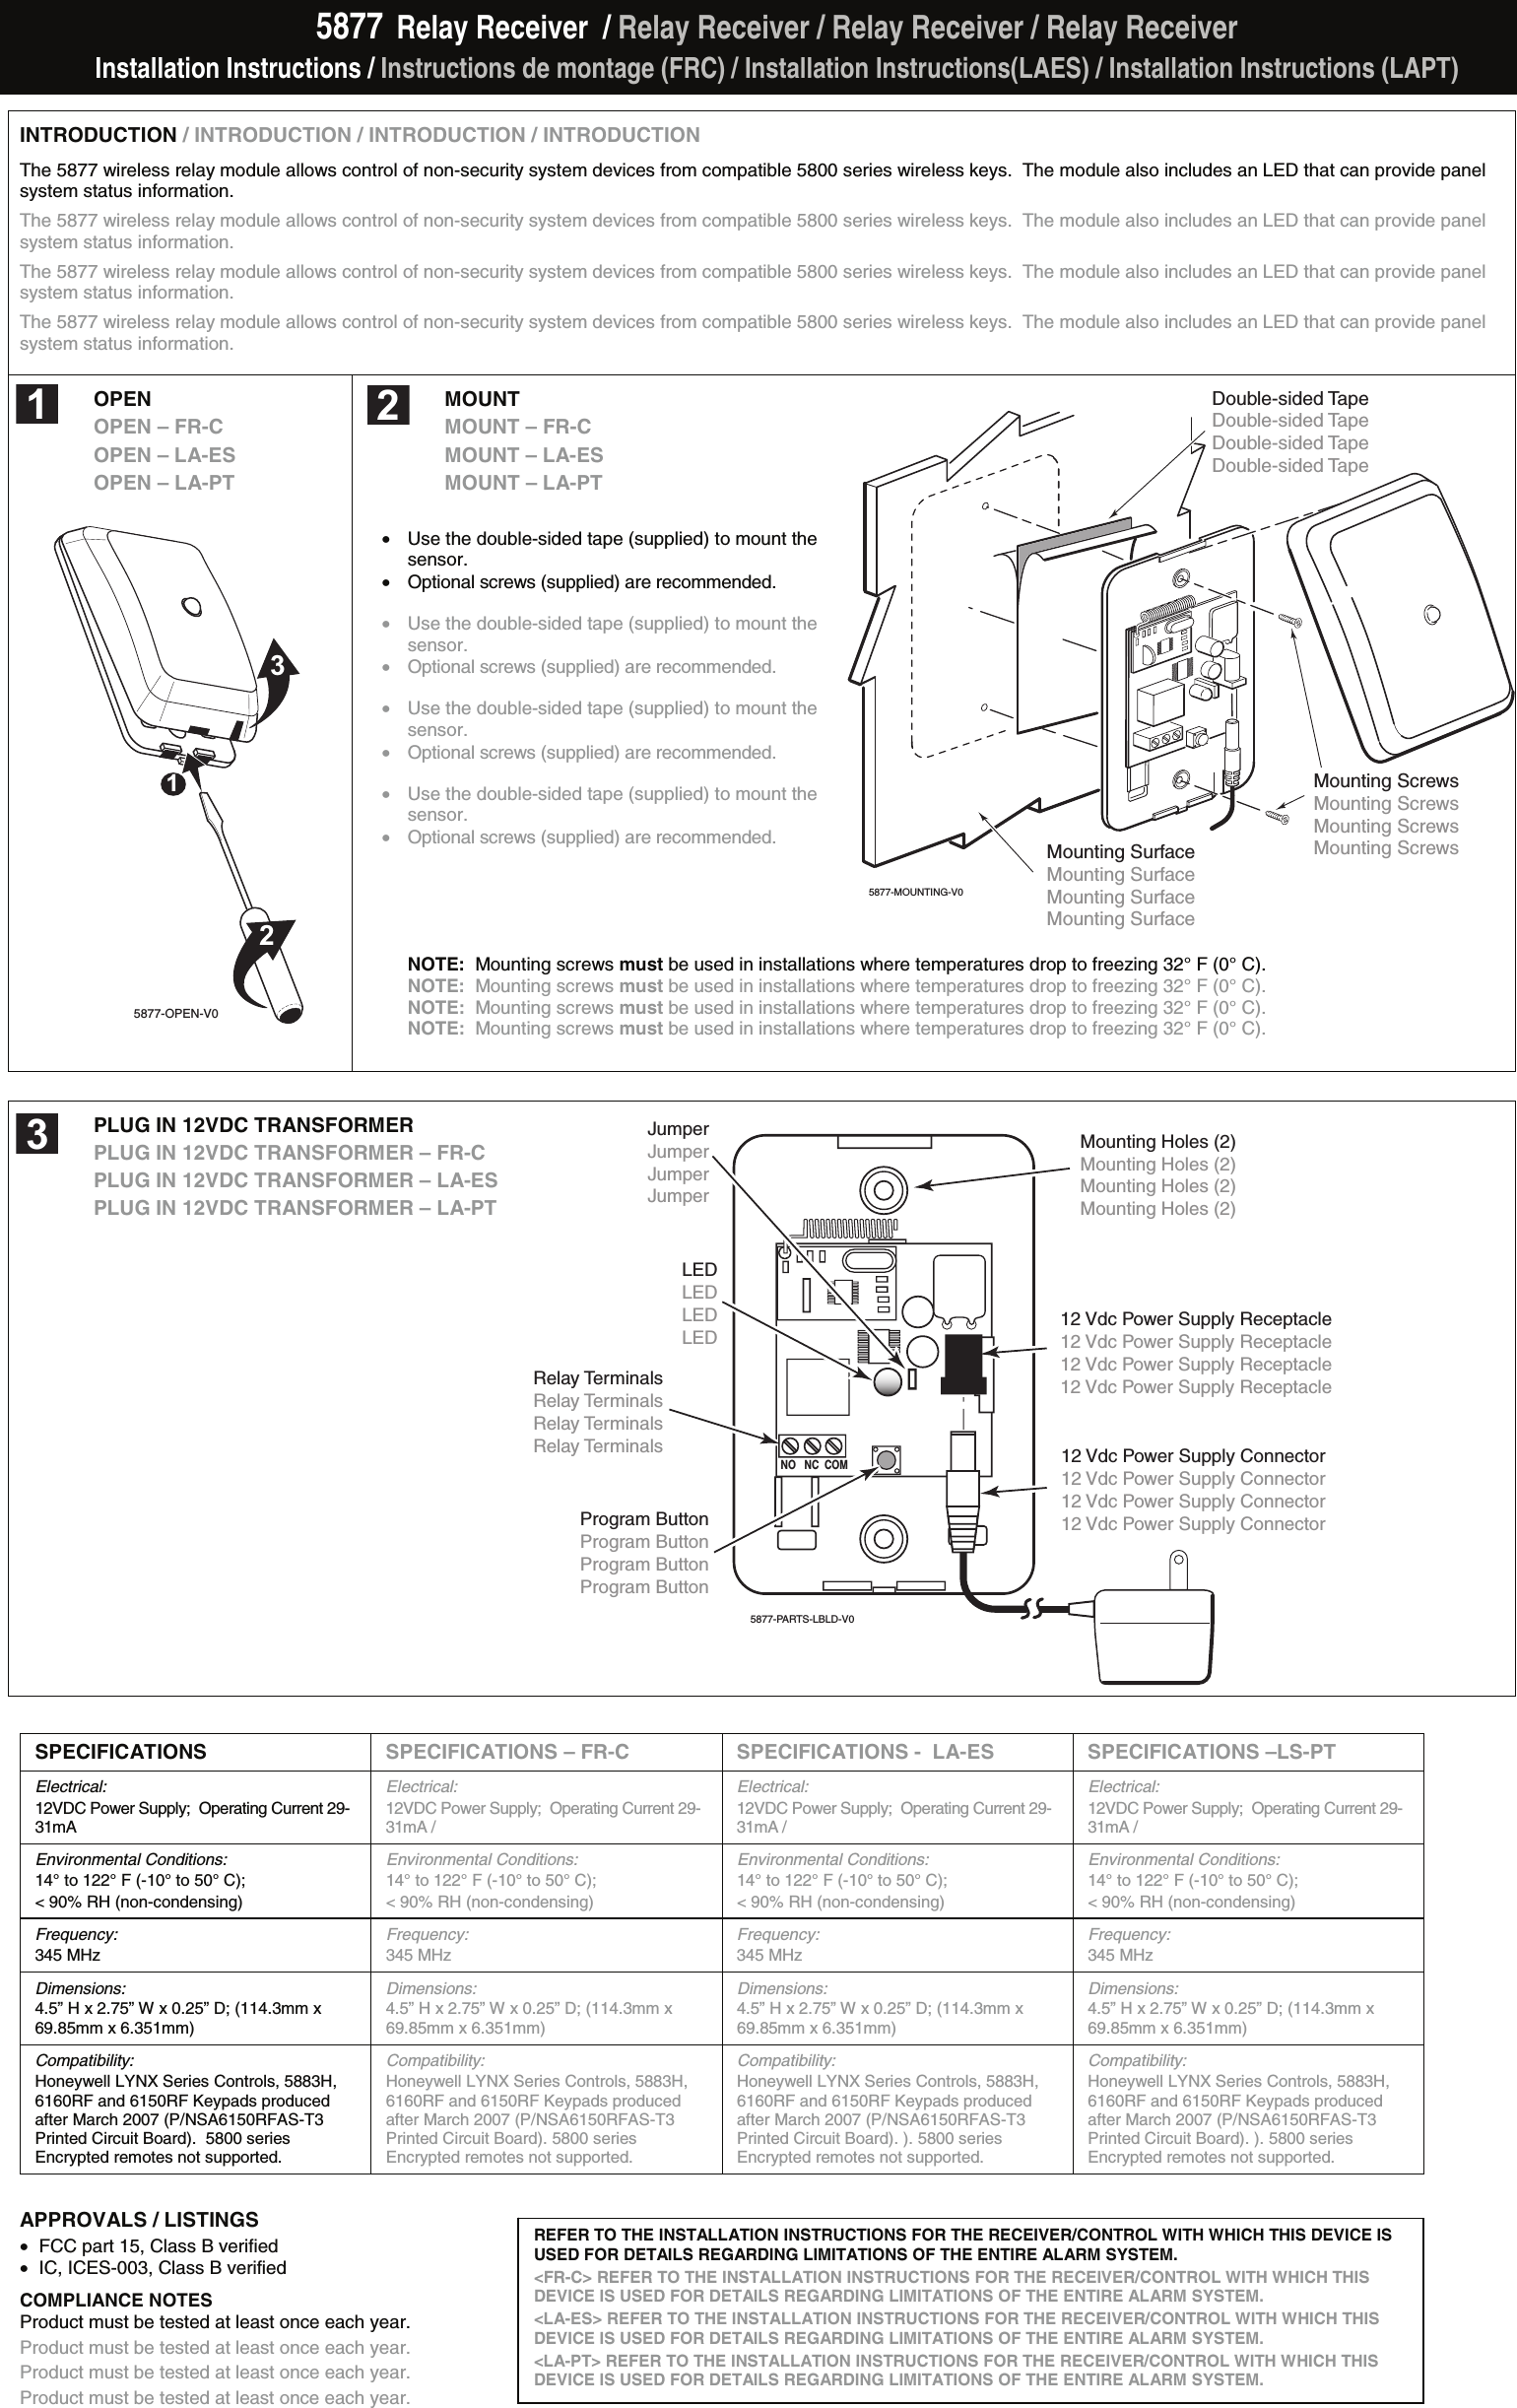 5877  Relay Receiver  / Relay Receiver / Relay Receiver / Relay Receiver Installation Instructions / Instructions de montage (FRC) / Installation Instructions(LAES) / Installation Instructions (LAPT)  INTRODUCTION / INTRODUCTION / INTRODUCTION / INTRODUCTION The 5877 wireless relay module allows control of non-security system devices from compatible 5800 series wireless keys.  The module also includes an LED that can provide panel system status information. The 5877 wireless relay module allows control of non-security system devices from compatible 5800 series wireless keys.  The module also includes an LED that can provide panel system status information. The 5877 wireless relay module allows control of non-security system devices from compatible 5800 series wireless keys.  The module also includes an LED that can provide panel system status information. The 5877 wireless relay module allows control of non-security system devices from compatible 5800 series wireless keys.  The module also includes an LED that can provide panel system status information. OPEN  OPEN – FR-C OPEN – LA-ES OPEN – LA-PT  5877-OPEN-V0123 MOUNT MOUNT – FR-C MOUNT – LA-ES MOUNT – LA-PT  •  Use the double-sided tape (supplied) to mount the sensor. •  Optional screws (supplied) are recommended.    •  Use the double-sided tape (supplied) to mount the sensor. •  Optional screws (supplied) are recommended.   •  Use the double-sided tape (supplied) to mount the sensor. •  Optional screws (supplied) are recommended.   •  Use the double-sided tape (supplied) to mount the sensor. •  Optional screws (supplied) are recommended.     NOTE:  Mounting screws must be used in installations where temperatures drop to freezing 32° F (0° C). NOTE:  Mounting screws must be used in installations where temperatures drop to freezing 32° F (0° C). NOTE:  Mounting screws must be used in installations where temperatures drop to freezing 32° F (0° C). NOTE:  Mounting screws must be used in installations where temperatures drop to freezing 32° F (0° C).   PLUG IN 12VDC TRANSFORMER PLUG IN 12VDC TRANSFORMER – FR-C PLUG IN 12VDC TRANSFORMER – LA-ES PLUG IN 12VDC TRANSFORMER – LA-PT                    SPECIFICATIONS SPECIFICATIONS – FR-C SPECIFICATIONS -  LA-ES SPECIFICATIONS –LS-PT Electrical:  12VDC Power Supply;  Operating Current 29-31mA / Electrical:  12VDC Power Supply;  Operating Current 29-31mA / Electrical:  12VDC Power Supply;  Operating Current 29-31mA / Electrical:  12VDC Power Supply;  Operating Current 29-31mA / Environmental Conditions:  14° to 122° F (-10° to 50° C);  &lt; 90% RH (non-condensing) Environmental Conditions:  14° to 122° F (-10° to 50° C);  &lt; 90% RH (non-condensing) Environmental Conditions:  14° to 122° F (-10° to 50° C);  &lt; 90% RH (non-condensing) Environmental Conditions:  14° to 122° F (-10° to 50° C); &lt; 90% RH (non-condensing) Frequency:  345 MHz Frequency:  345 MHz Frequency:  345 MHz Frequency:  345 MHz Dimensions:  4.5” H x 2.75” W x 0.25” D; (114.3mm x 69.85mm x 6.351mm) Dimensions:  4.5” H x 2.75” W x 0.25” D; (114.3mm x 69.85mm x 6.351mm) Dimensions:  4.5” H x 2.75” W x 0.25” D; (114.3mm x 69.85mm x 6.351mm) Dimensions:  4.5” H x 2.75” W x 0.25” D; (114.3mm x 69.85mm x 6.351mm) Compatibility:  Honeywell LYNX Series Controls, 5883H, 6160RF and 6150RF Keypads produced after March 2007 (P/NSA6150RFAS-T3 Printed Circuit Board).  5800 series Encrypted remotes not supported. Compatibility:  Honeywell LYNX Series Controls, 5883H, 6160RF and 6150RF Keypads produced after March 2007 (P/NSA6150RFAS-T3 Printed Circuit Board). 5800 series Encrypted remotes not supported. Compatibility:  Honeywell LYNX Series Controls, 5883H, 6160RF and 6150RF Keypads produced after March 2007 (P/NSA6150RFAS-T3 Printed Circuit Board). ). 5800 series Encrypted remotes not supported. Compatibility:  Honeywell LYNX Series Controls, 5883H, 6160RF and 6150RF Keypads produced after March 2007 (P/NSA6150RFAS-T3 Printed Circuit Board). ). 5800 series Encrypted remotes not supported.      APPROVALS / LISTINGS •  FCC part 15, Class B verified  •  IC, ICES-003, Class B verified   COMPLIANCE NOTES  Product must be tested at least once each year. Product must be tested at least once each year. Product must be tested at least once each year. Product must be tested at least once each year. REFER TO THE INSTALLATION INSTRUCTIONS FOR THE RECEIVER/CONTROL WITH WHICH THIS DEVICE IS USED FOR DETAILS REGARDING LIMITATIONS OF THE ENTIRE ALARM SYSTEM. &lt;FR-C&gt; REFER TO THE INSTALLATION INSTRUCTIONS FOR THE RECEIVER/CONTROL WITH WHICH THIS DEVICE IS USED FOR DETAILS REGARDING LIMITATIONS OF THE ENTIRE ALARM SYSTEM. &lt;LA-ES&gt; REFER TO THE INSTALLATION INSTRUCTIONS FOR THE RECEIVER/CONTROL WITH WHICH THIS DEVICE IS USED FOR DETAILS REGARDING LIMITATIONS OF THE ENTIRE ALARM SYSTEM. &lt;LA-PT&gt; REFER TO THE INSTALLATION INSTRUCTIONS FOR THE RECEIVER/CONTROL WITH WHICH THIS DEVICE IS USED FOR DETAILS REGARDING LIMITATIONS OF THE ENTIRE ALARM SYSTEM. 5877-MOUNTING-V0Mounting Screws Mounting Screws Mounting Screws Mounting Screws Double-sided Tape Double-sided Tape Double-sided Tape Double-sided Tape Mounting SurfaceMounting SurfaceMounting Surface Mounting Surface   Relay TerminalsRelay TerminalsRelay TerminalsRelay TerminalsMounting Holes (2)Mounting Holes (2)Mounting Holes (2)Mounting Holes (2)12 Vdc Power Supply Connector12 Vdc Power Supply Connector12 Vdc Power Supply Connector12 Vdc Power Supply Connector12 Vdc Power Supply Receptacle12 Vdc Power Supply Receptacle12 Vdc Power Supply Receptacle12 Vdc Power Supply ReceptacleLEDLEDLEDLEDProgram ButtonProgram ButtonProgram ButtonProgram ButtonJumperJumperJumperJumper5877-PARTS-LBLD-V0NO   NC  COM   1 2 3 